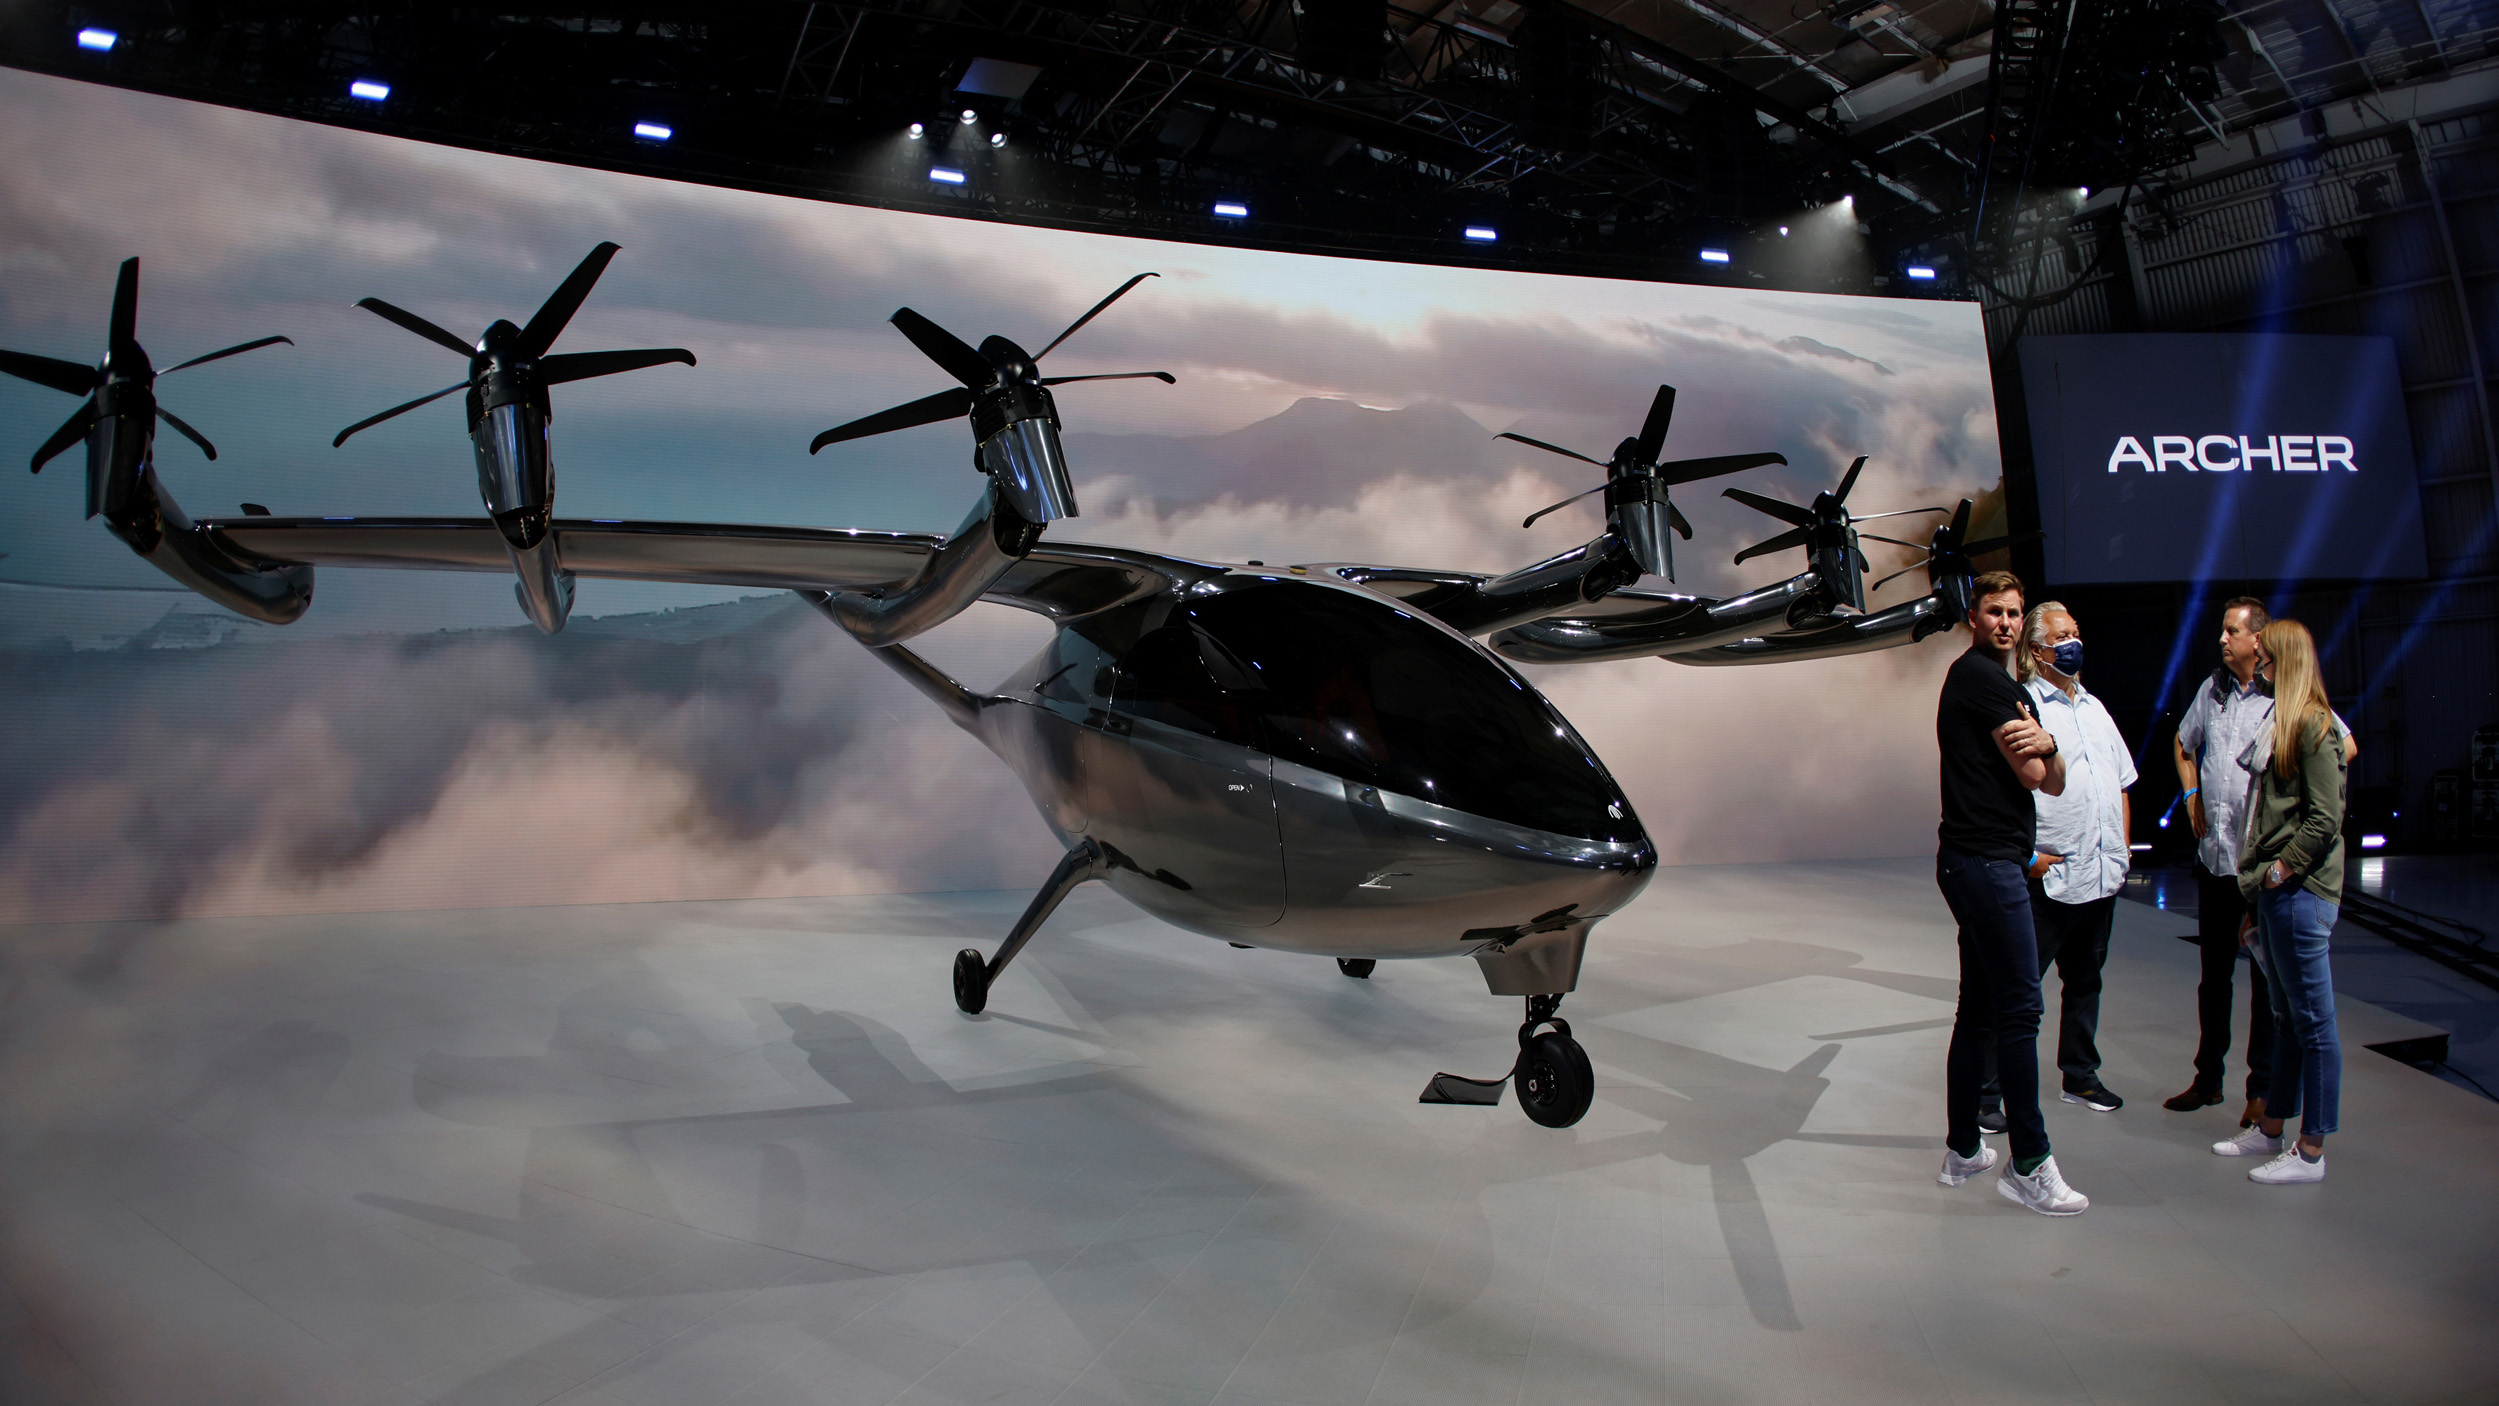 Archer twoseater flying taxi makes splashy debut in hot eVTOL market